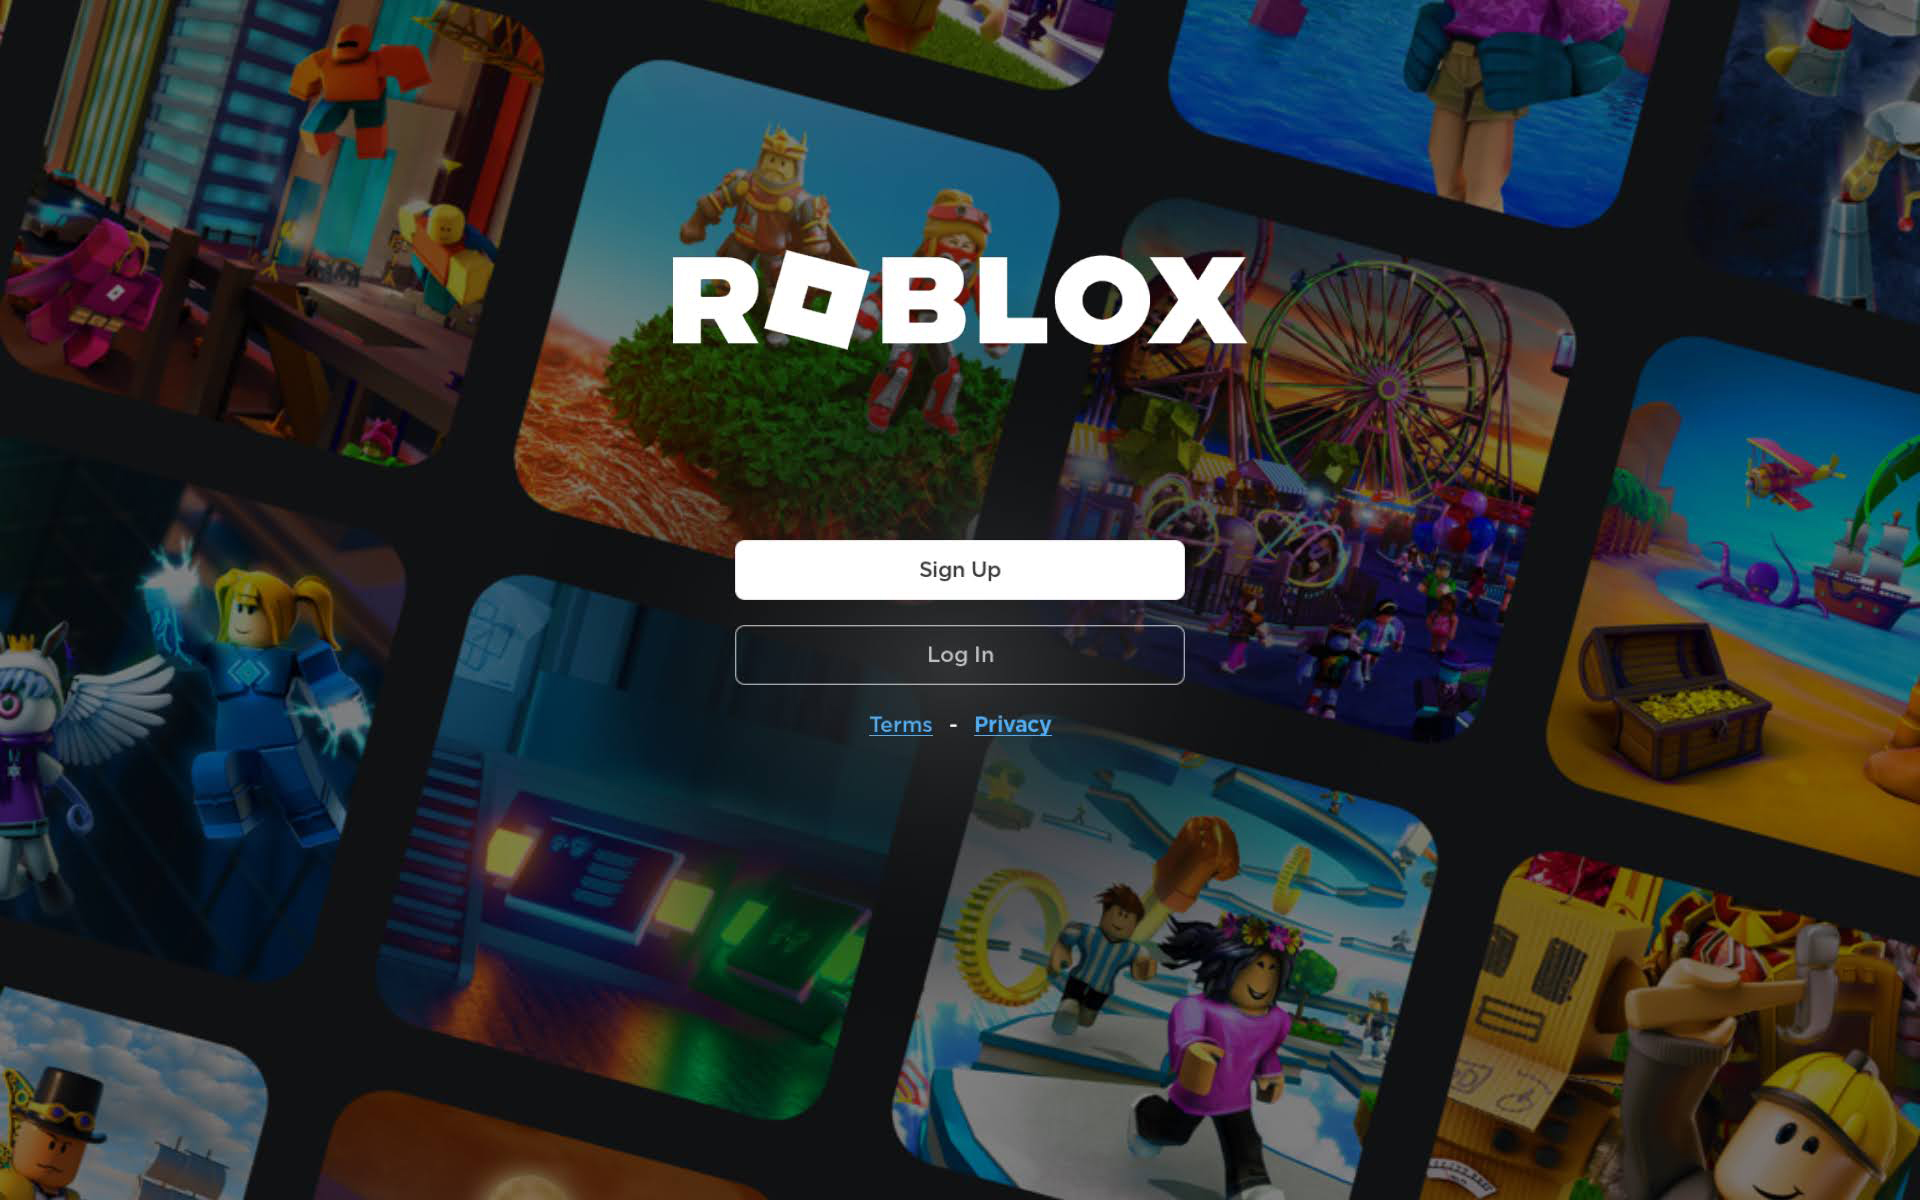 HowTo Install Roblox on Chromebook - It's easy! 